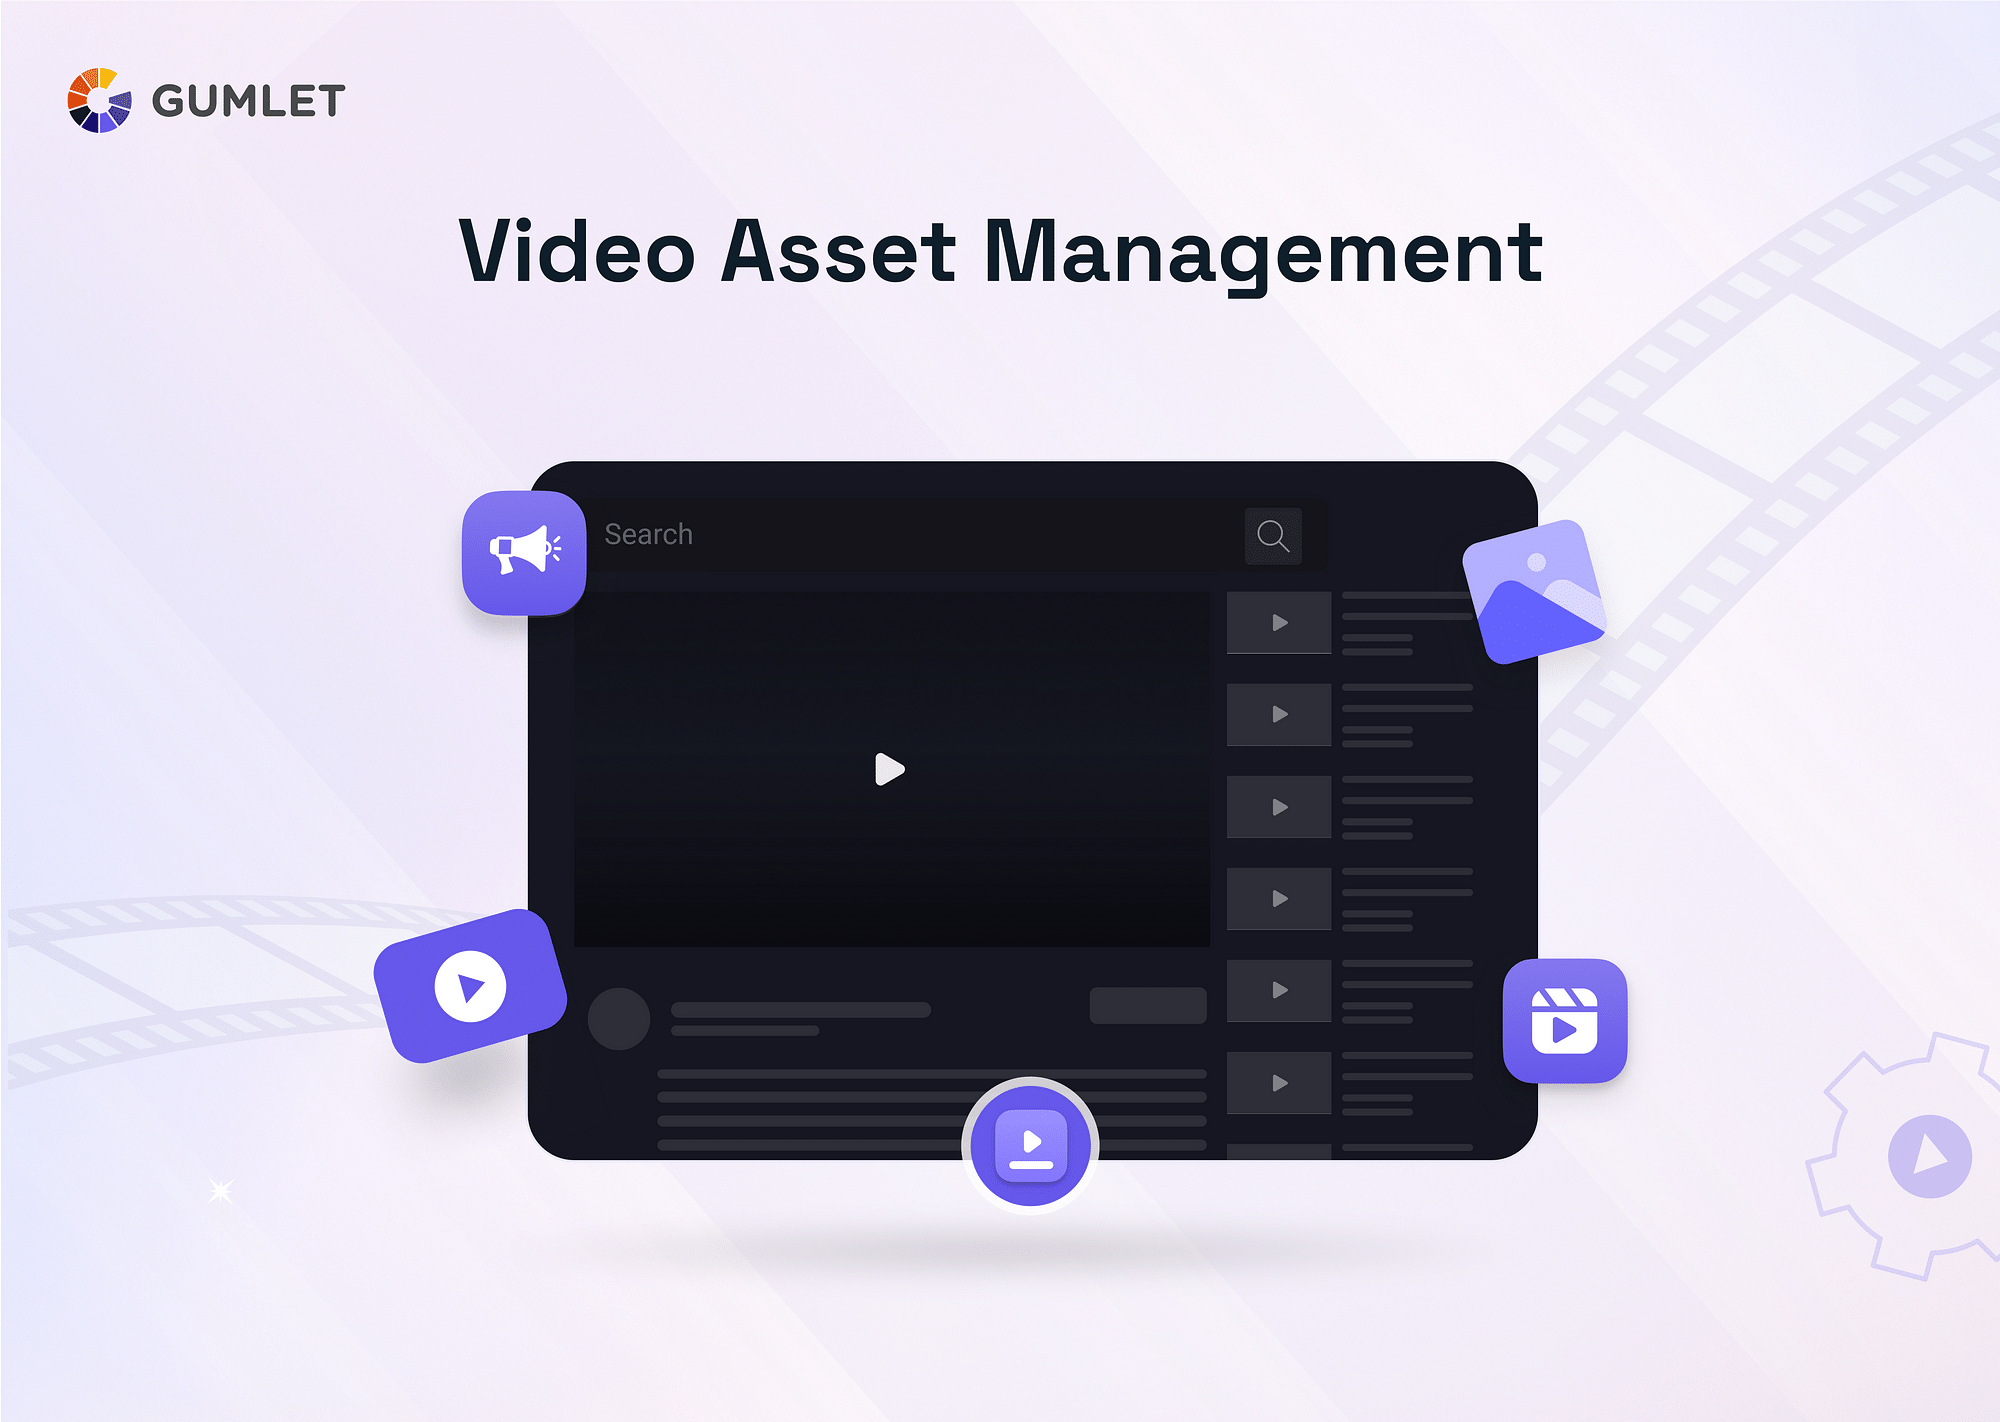 Why Does Your Business Need Video Asset Management?